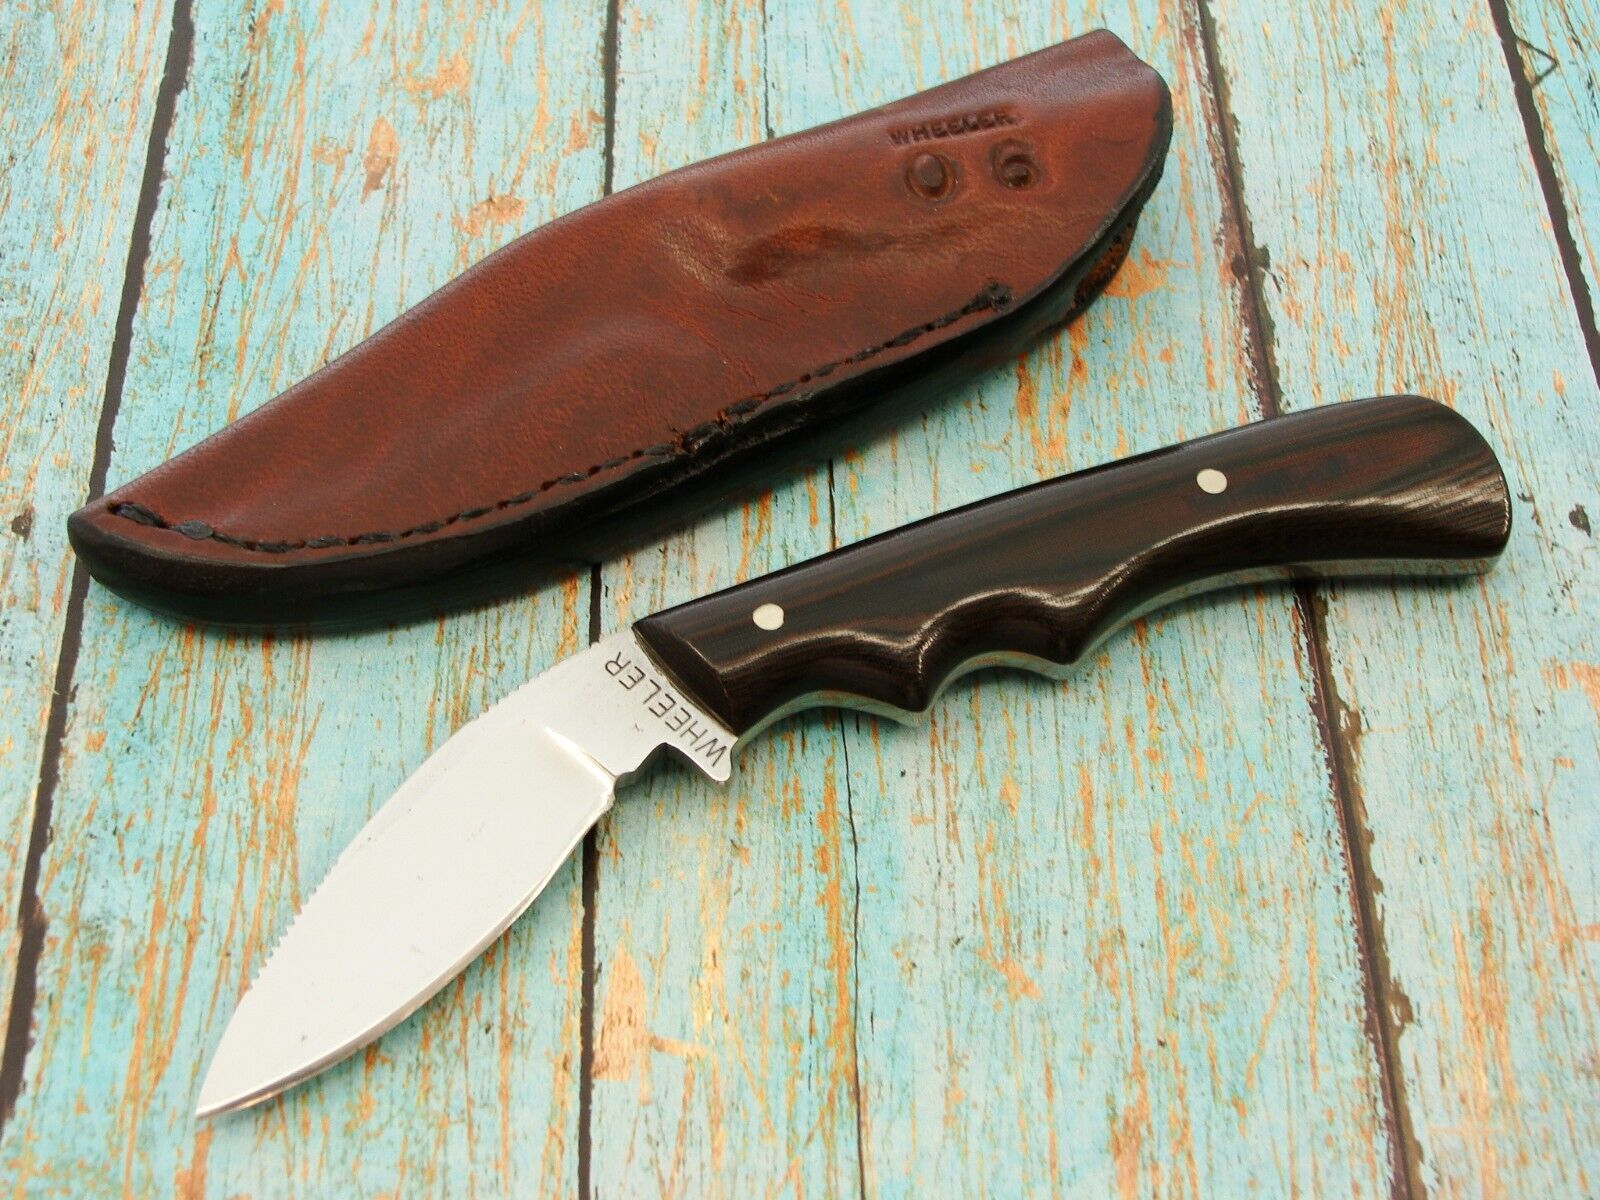 GARY WHEELER USA HAND MADE MICARTA CAPE PATCH CLAW HUNTING BOOT KNIFE SET KNIVES